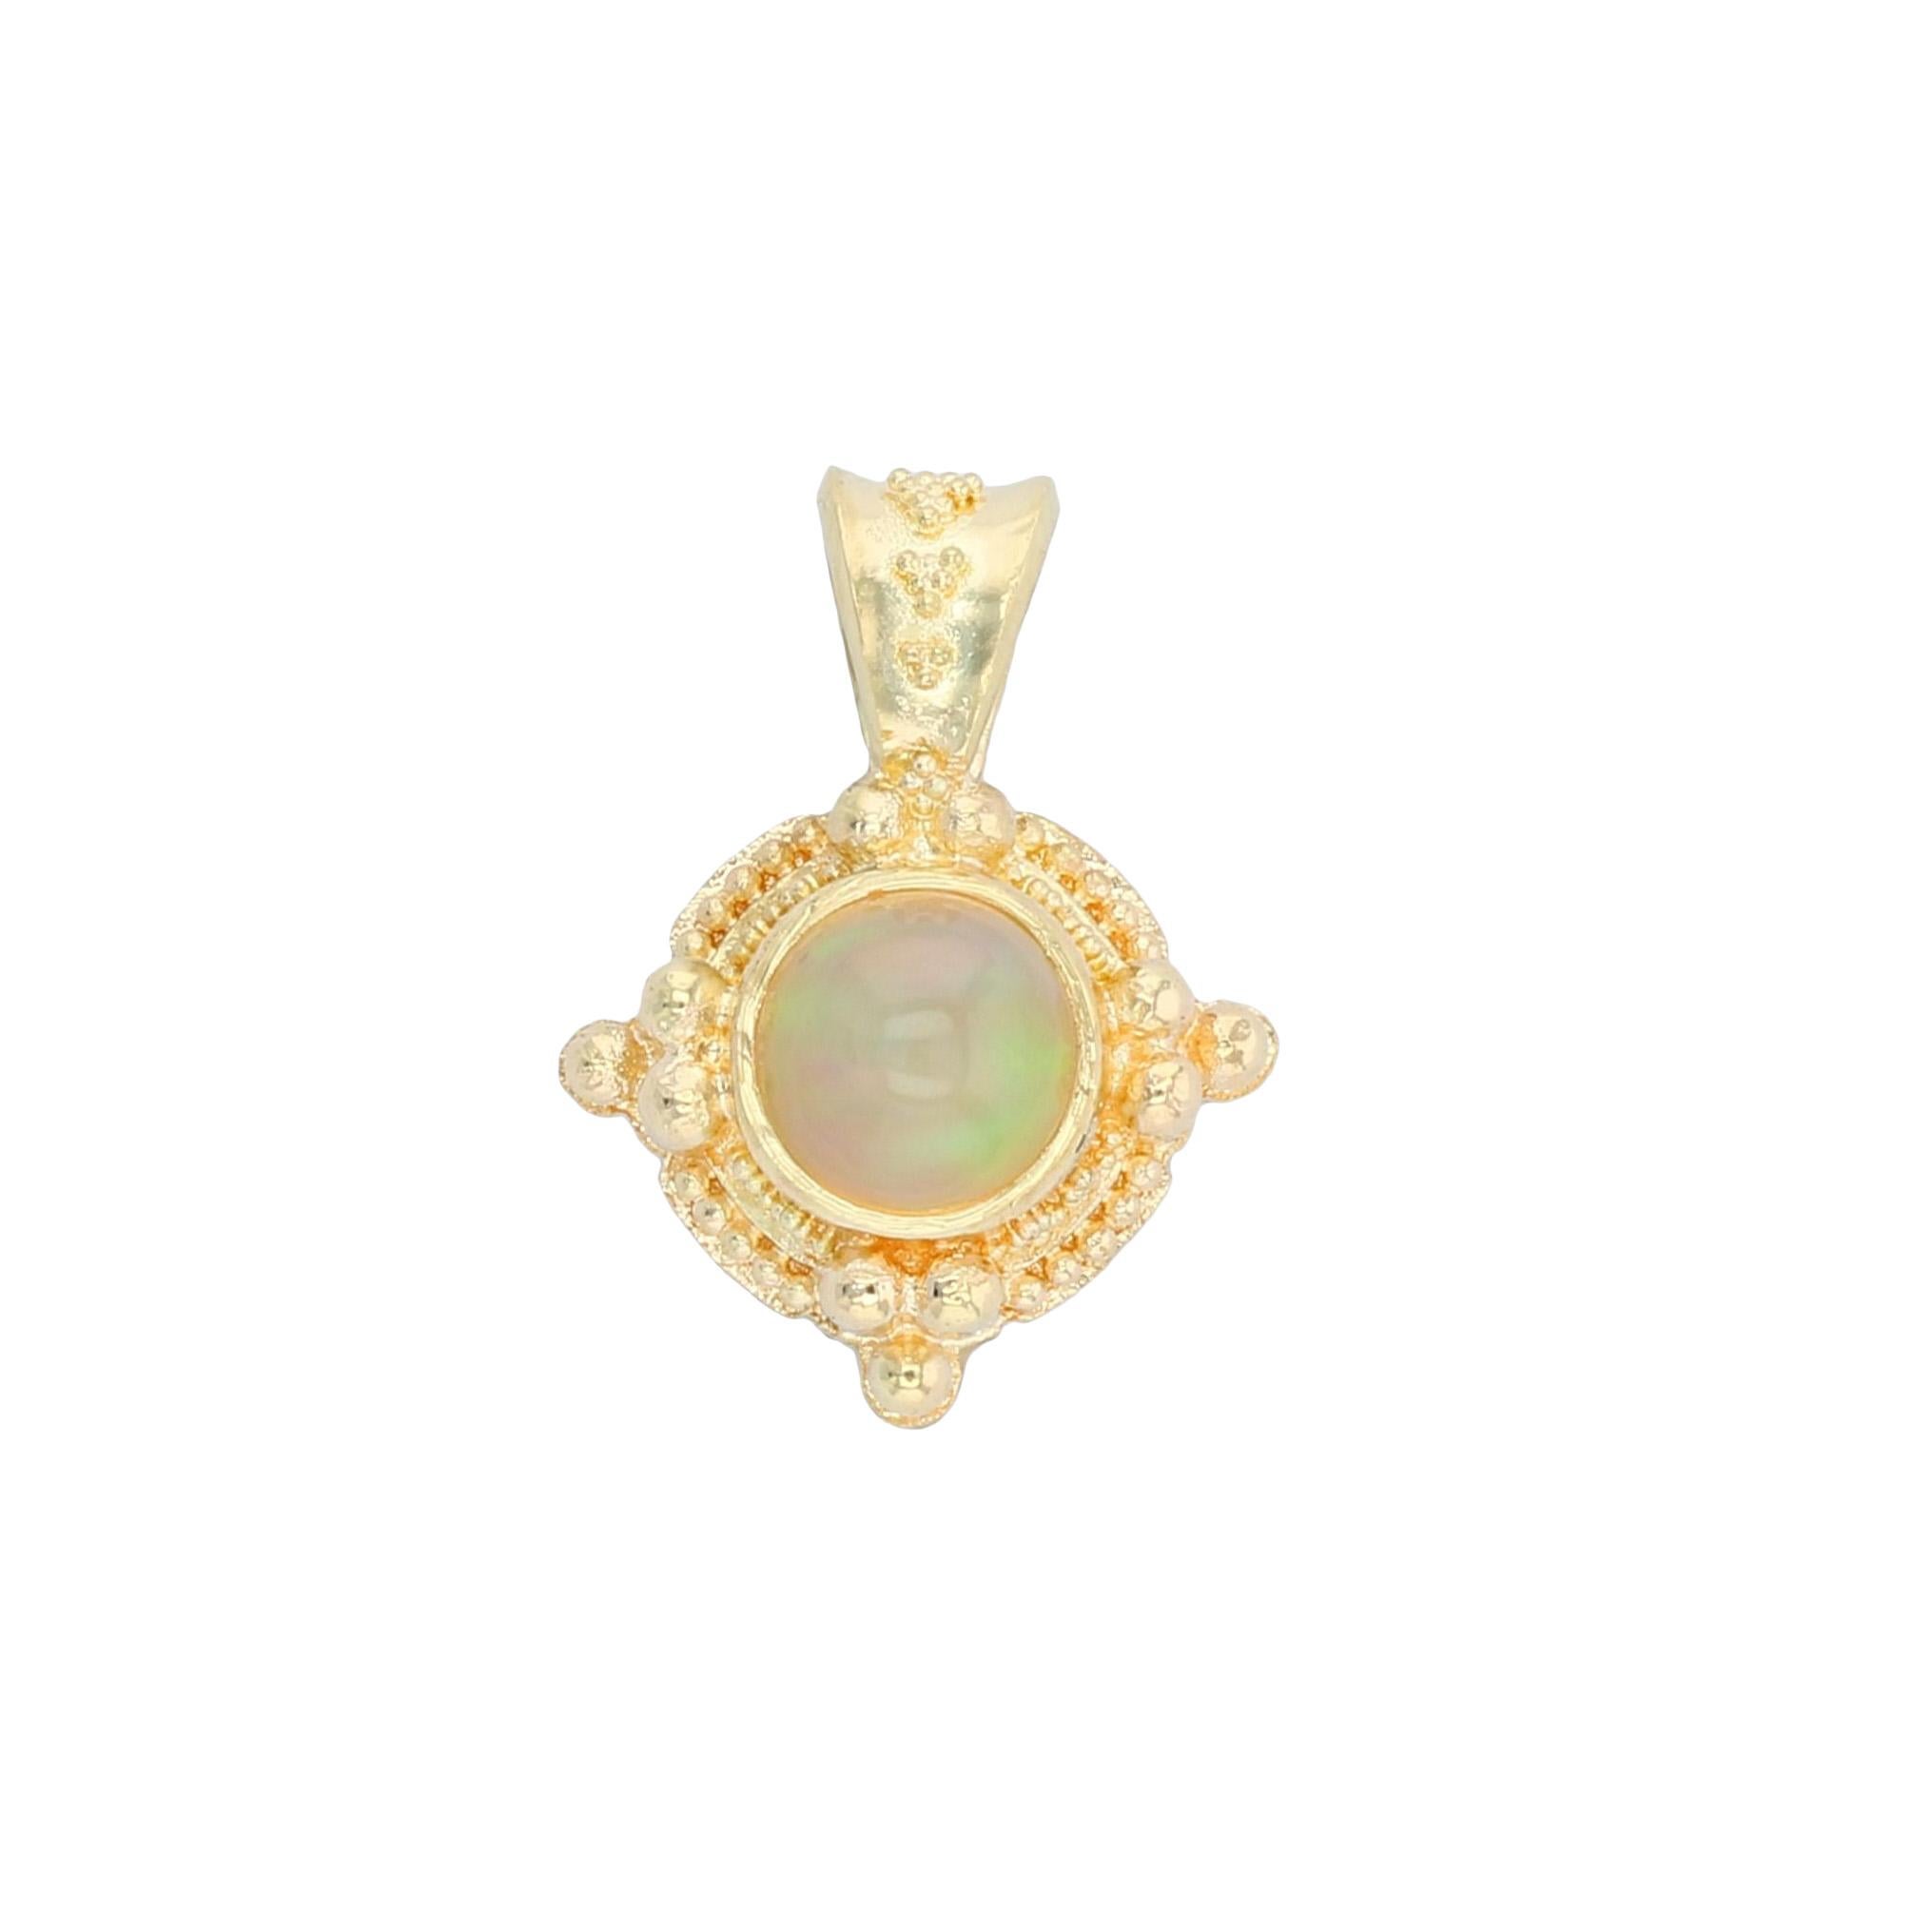 From the Kent Raible limited edition 'Studio Collection' we have his Ethiopian Opal Pendant enhancer.  This pendant, in its classic shape, offers the multi color flashes found only in Opal, all framed in intricate detail and fine granulation in true